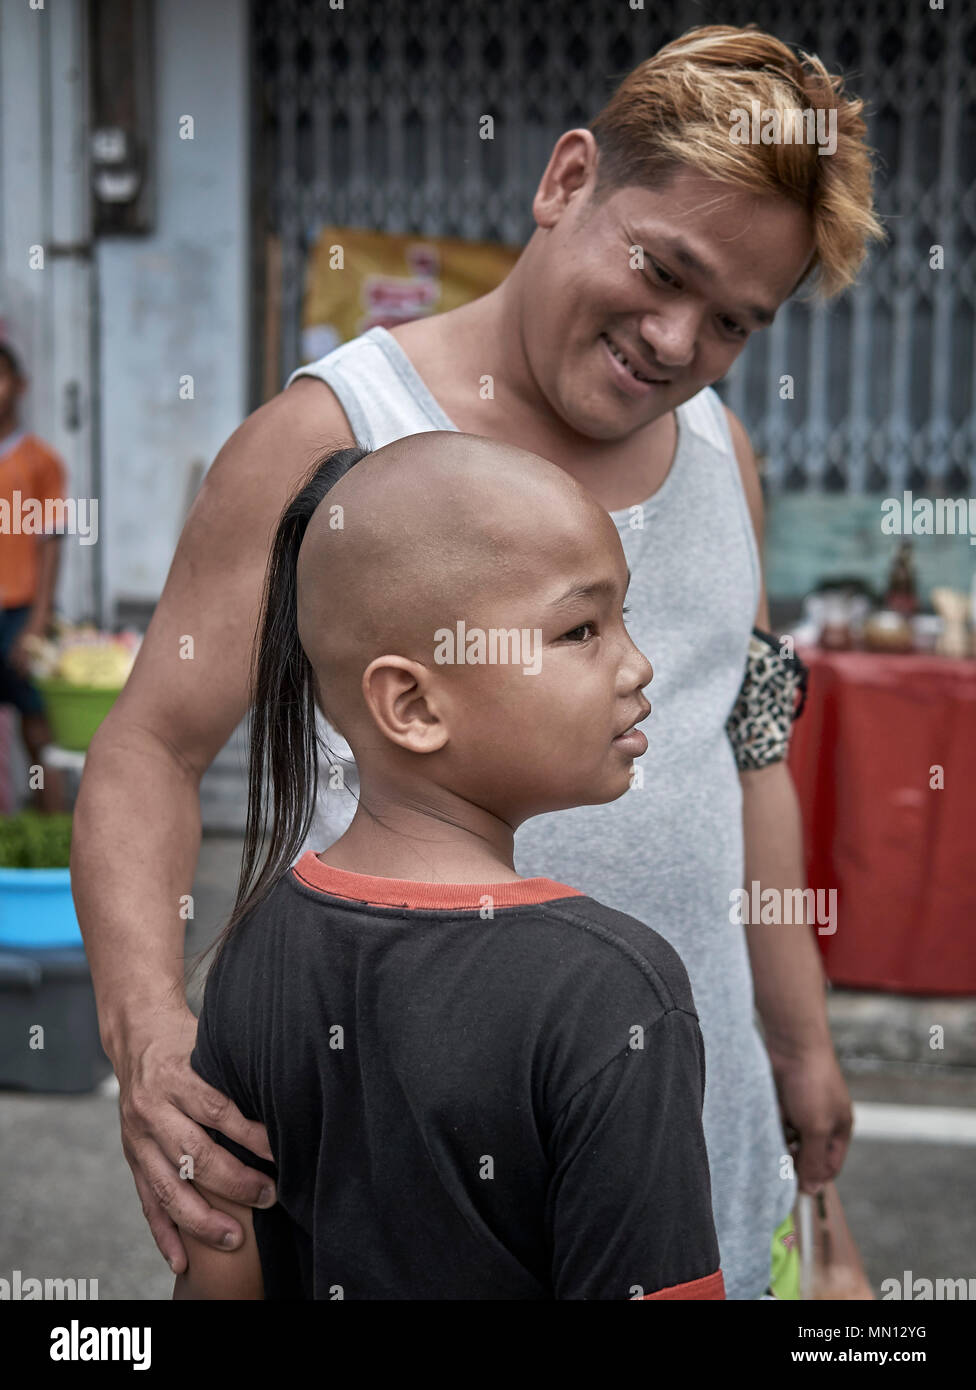 Thailand child. Traditional top knot shaven head hairstyle on a Thai young  boy. Thailand S. E. Asia Stock Photo - Alamy